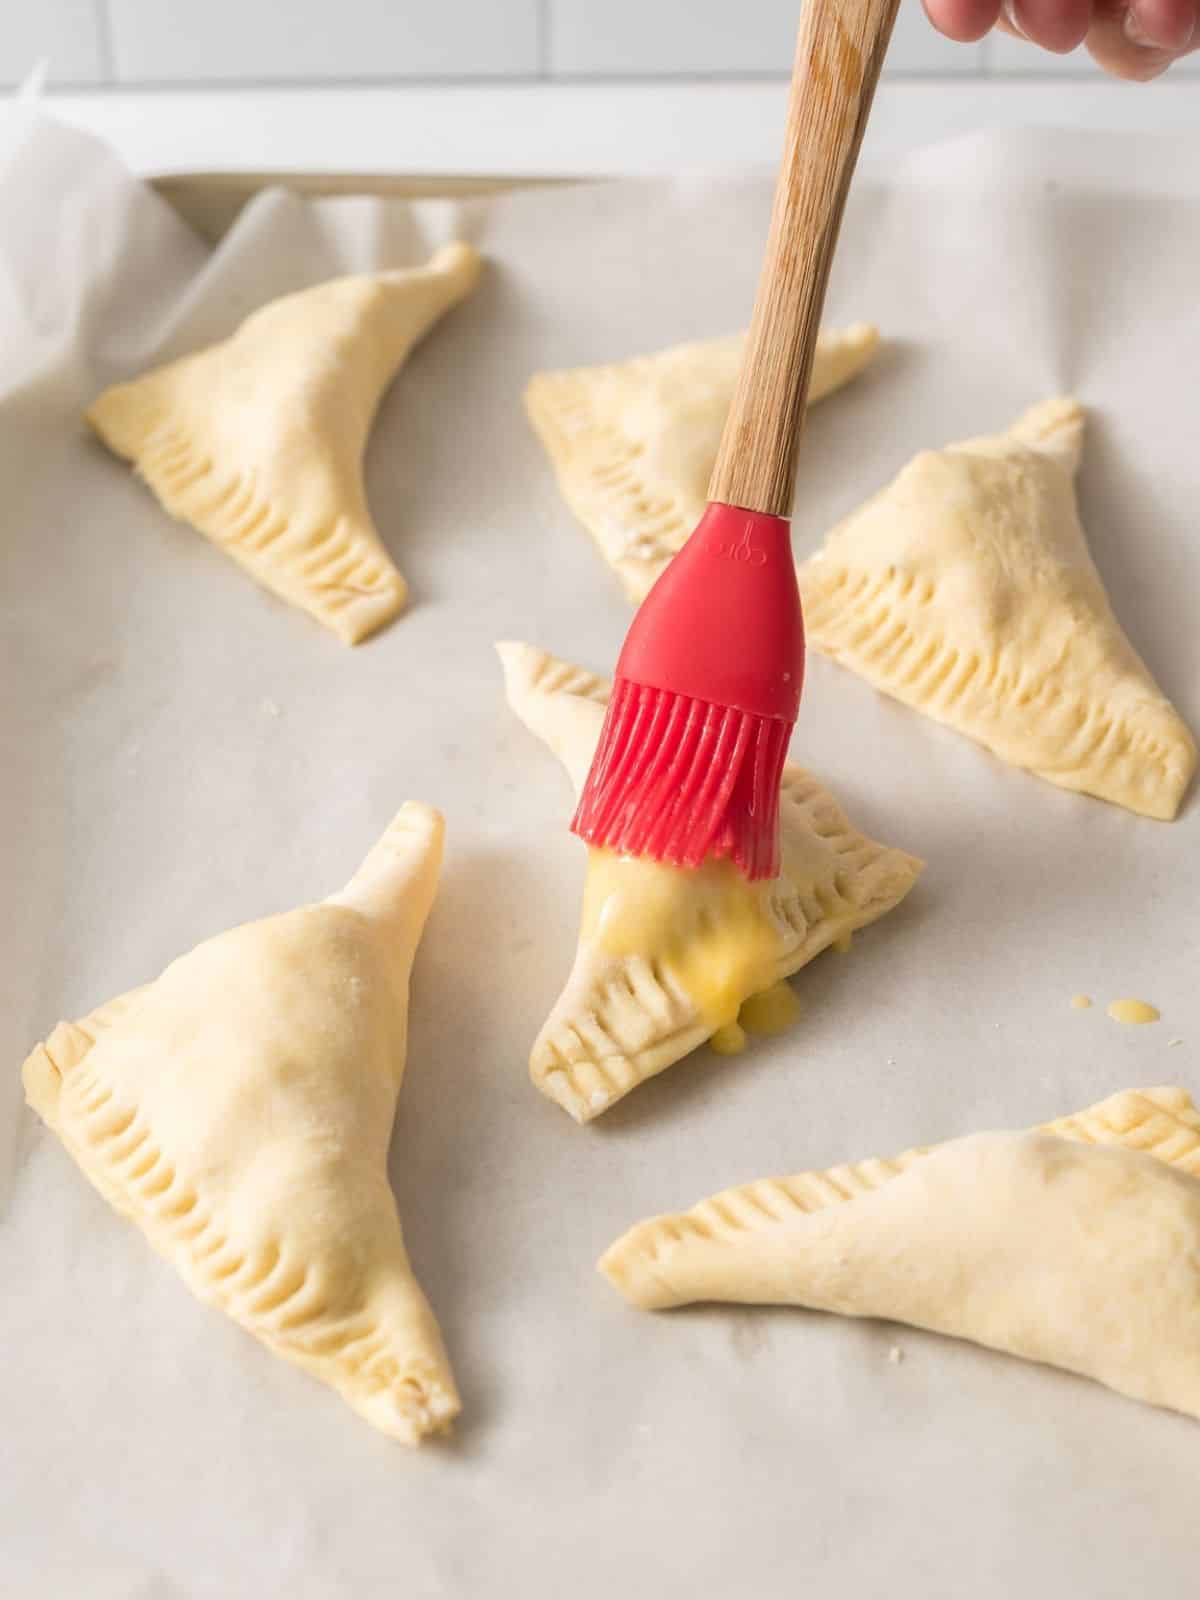 puff pastry pockets being brushed with egg wash with a red silicone pastry brush.